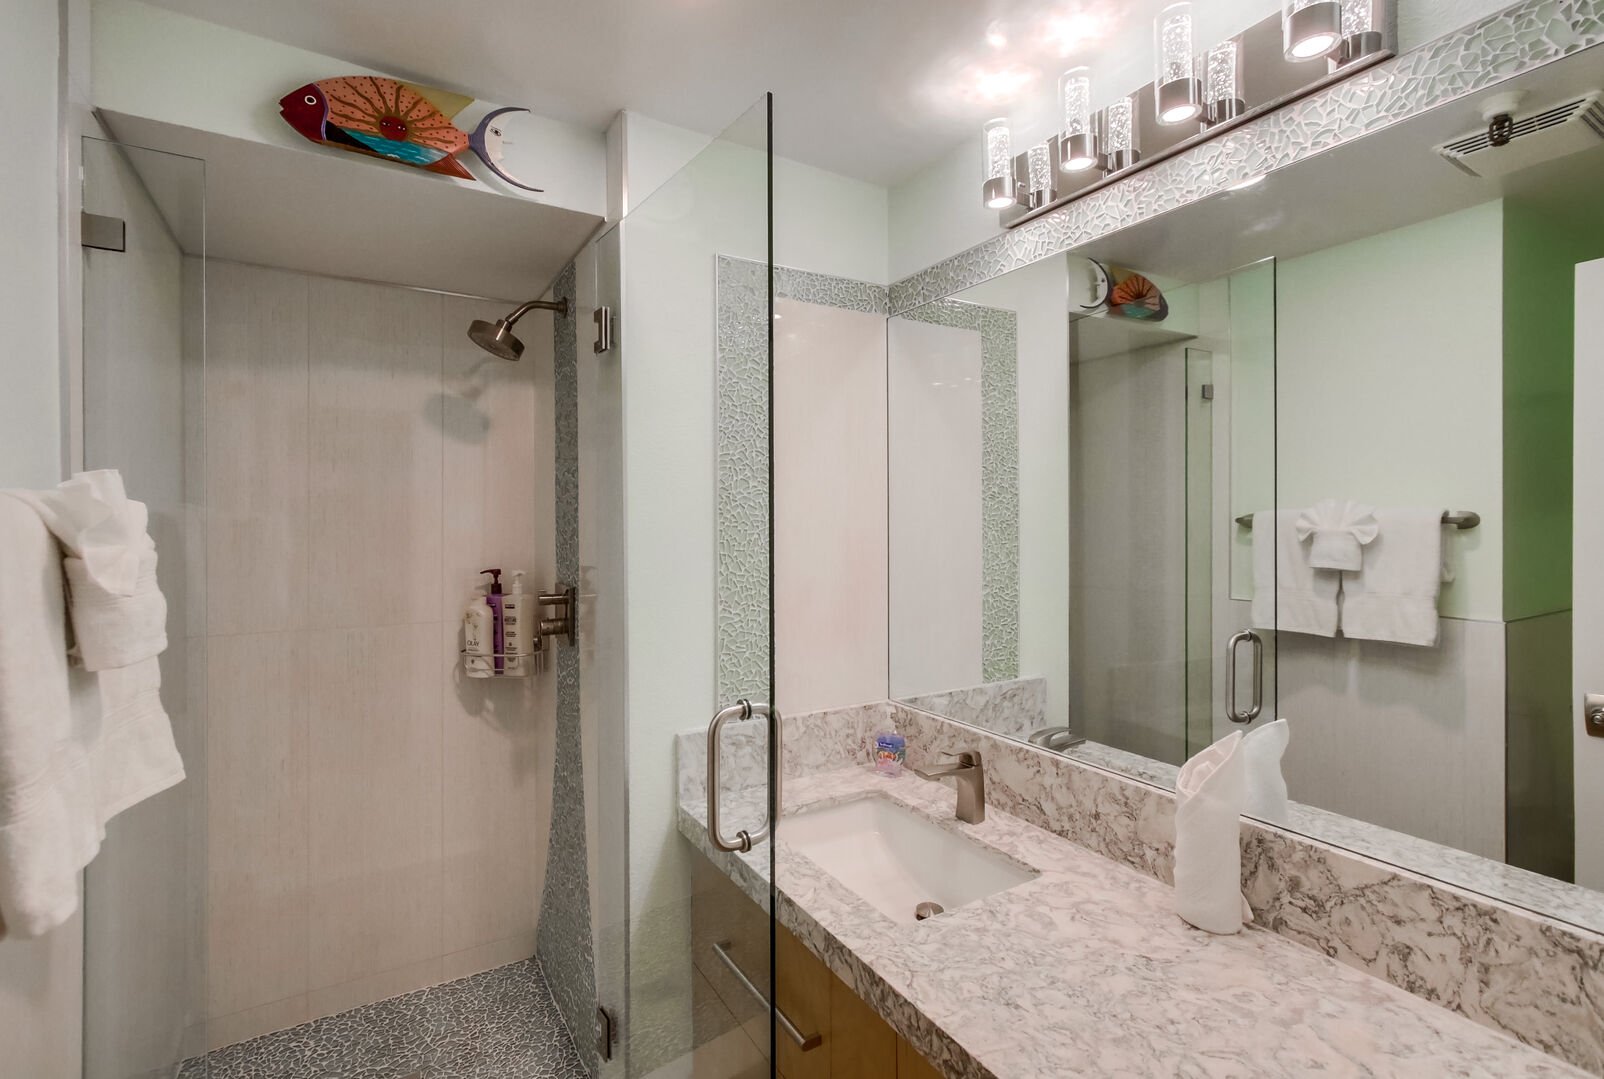 Brand new remodeled full guest bathroom! Walk-in shower, large vanity, new light fixtures and countertops